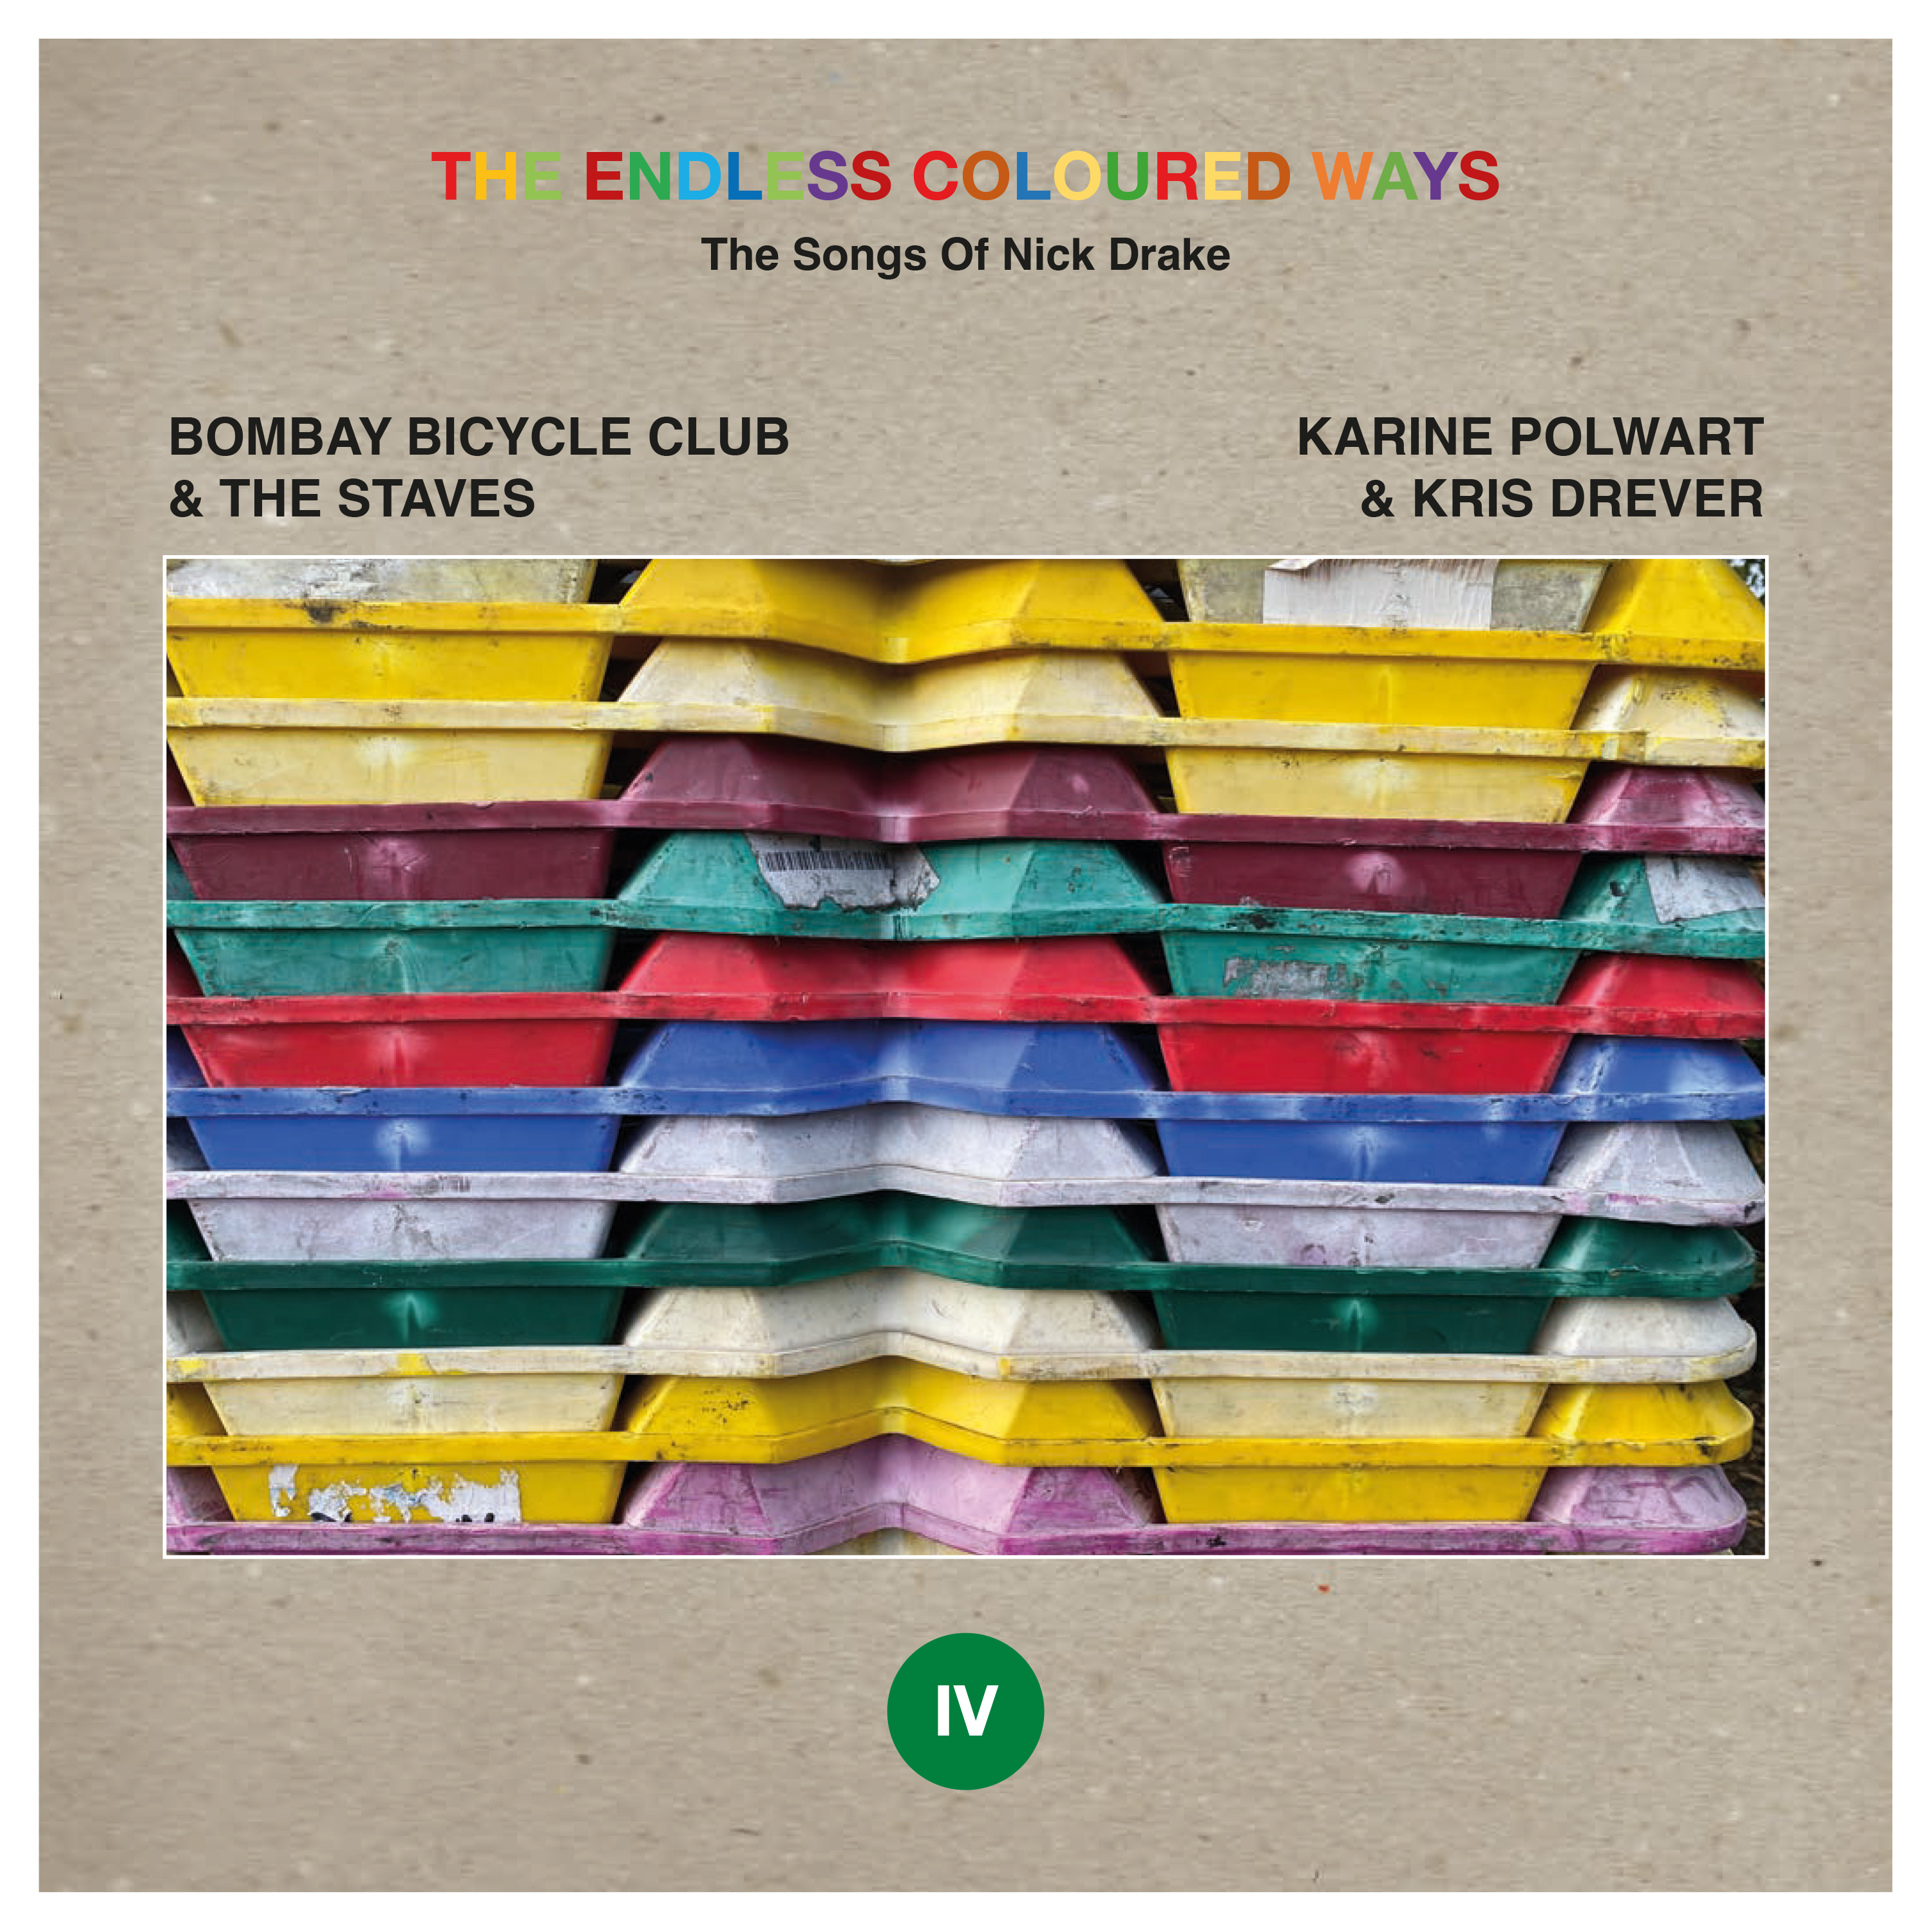 Bombay Bicycle Club & The Staves / Karine Polwart & Kris Drever - The Endless Coloured Ways: The Song